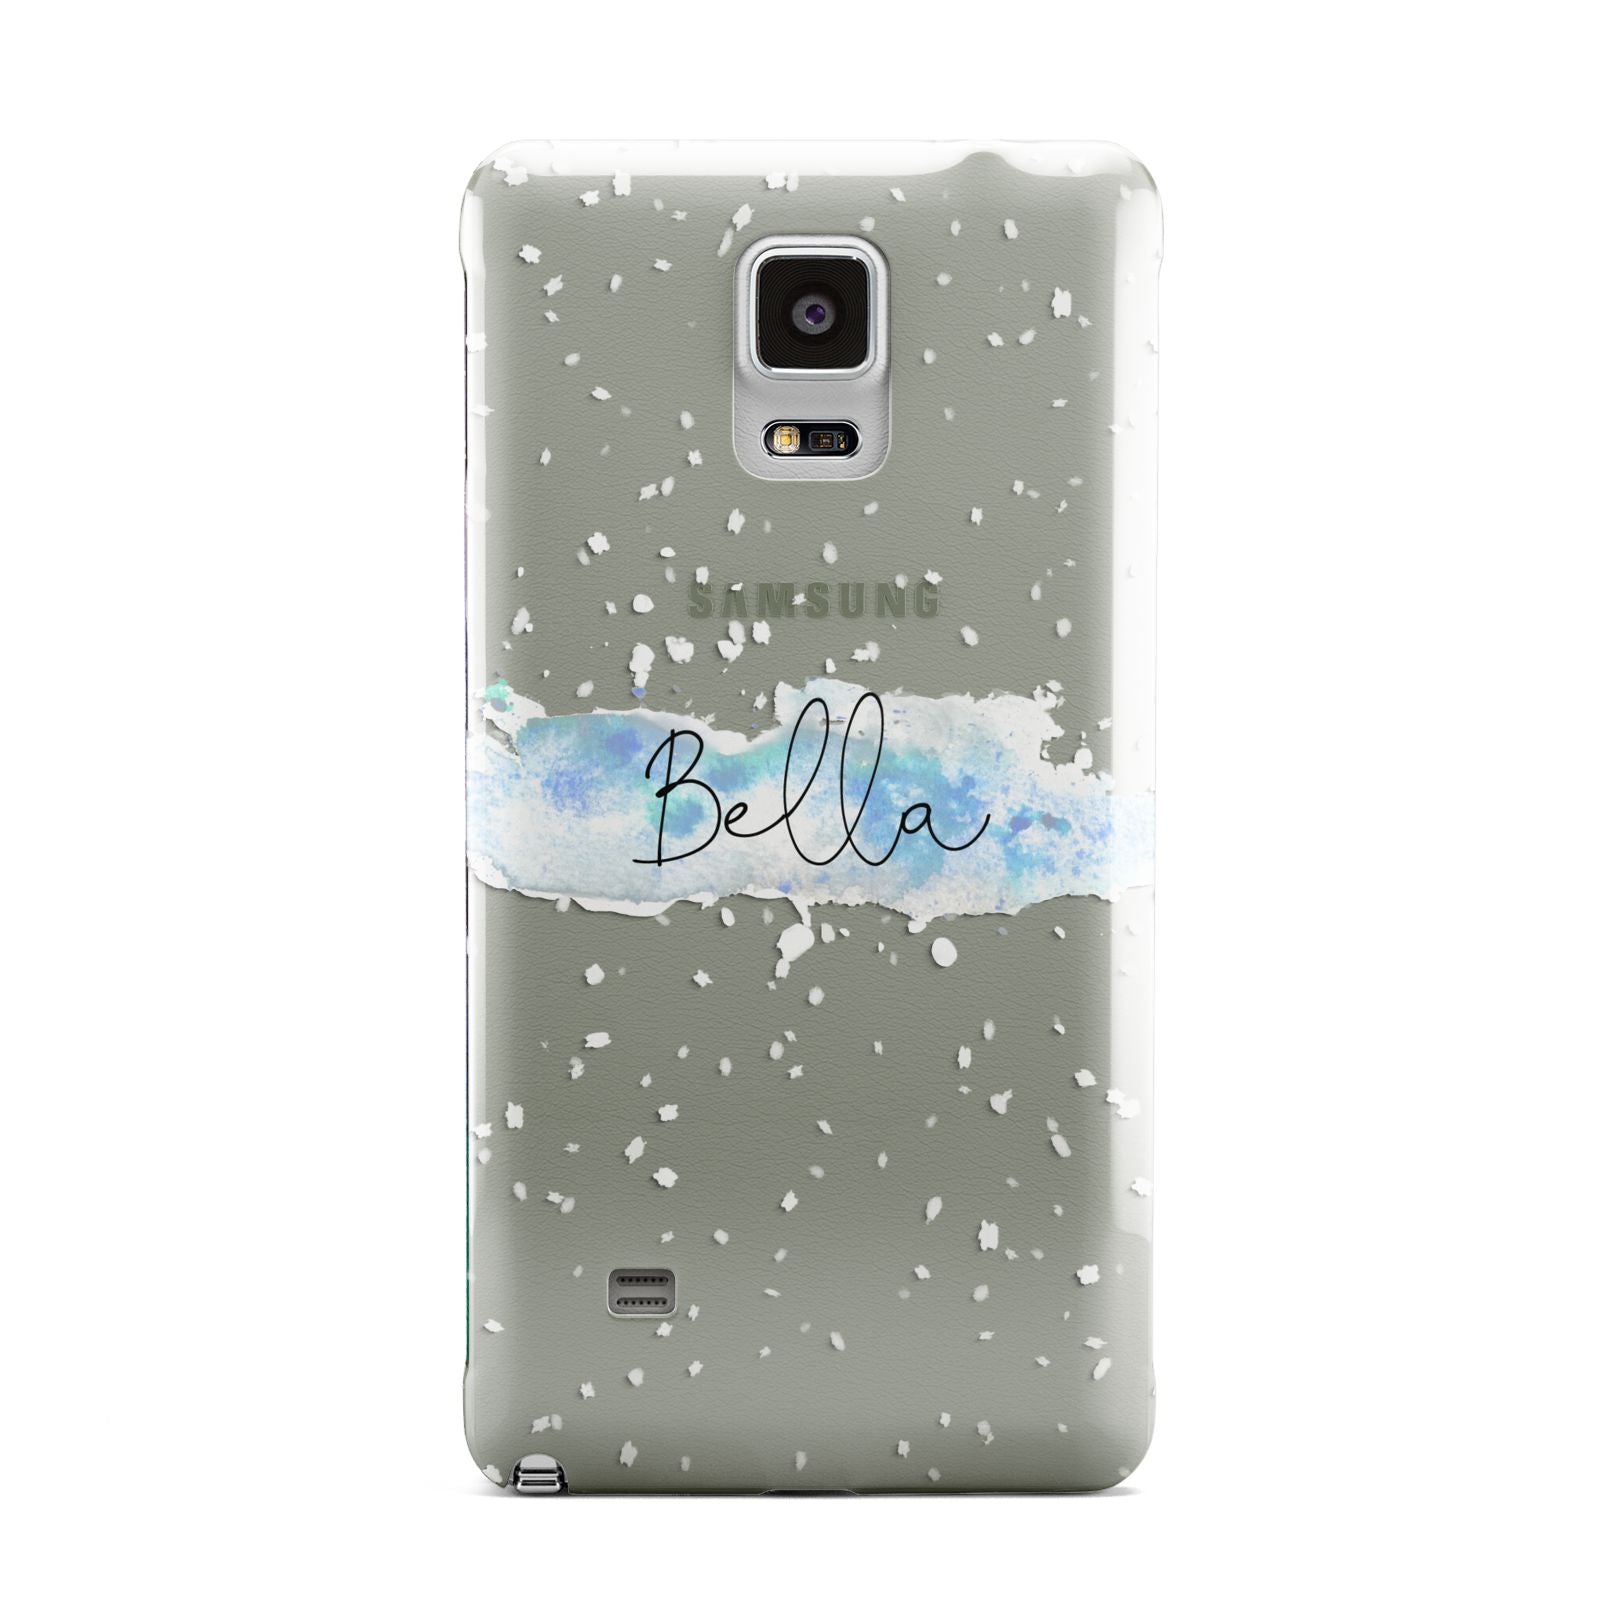 Personalised Christmas Snow fall Samsung Galaxy Note 4 Case